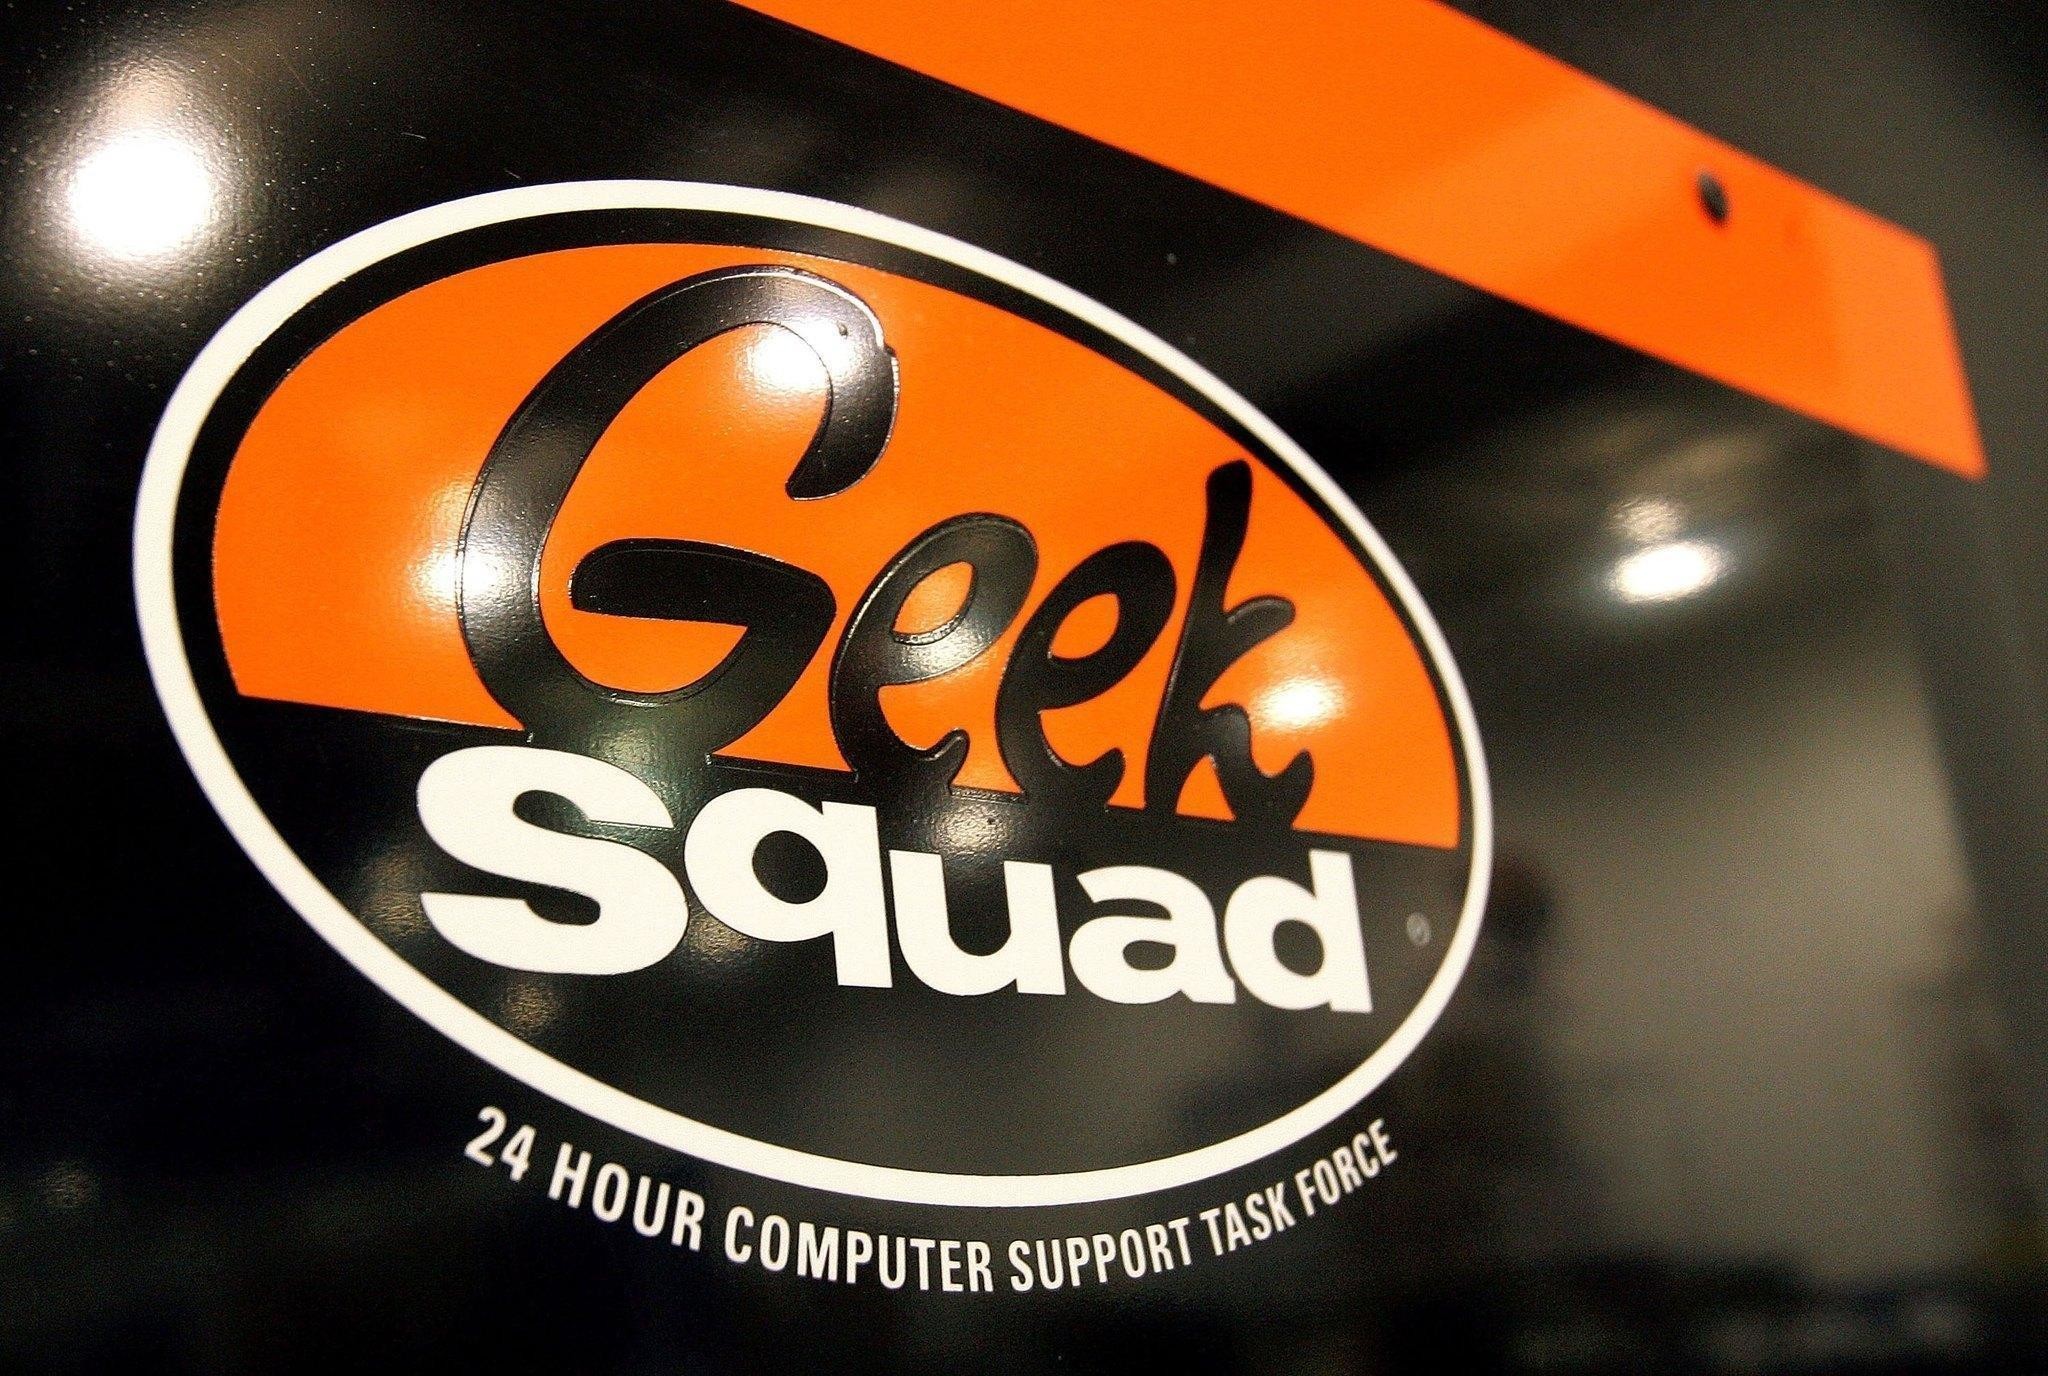 2048x1376 Best Buy 'Geek Squad' worker helped FBI in child porn bust, attorney claims  - LA Times